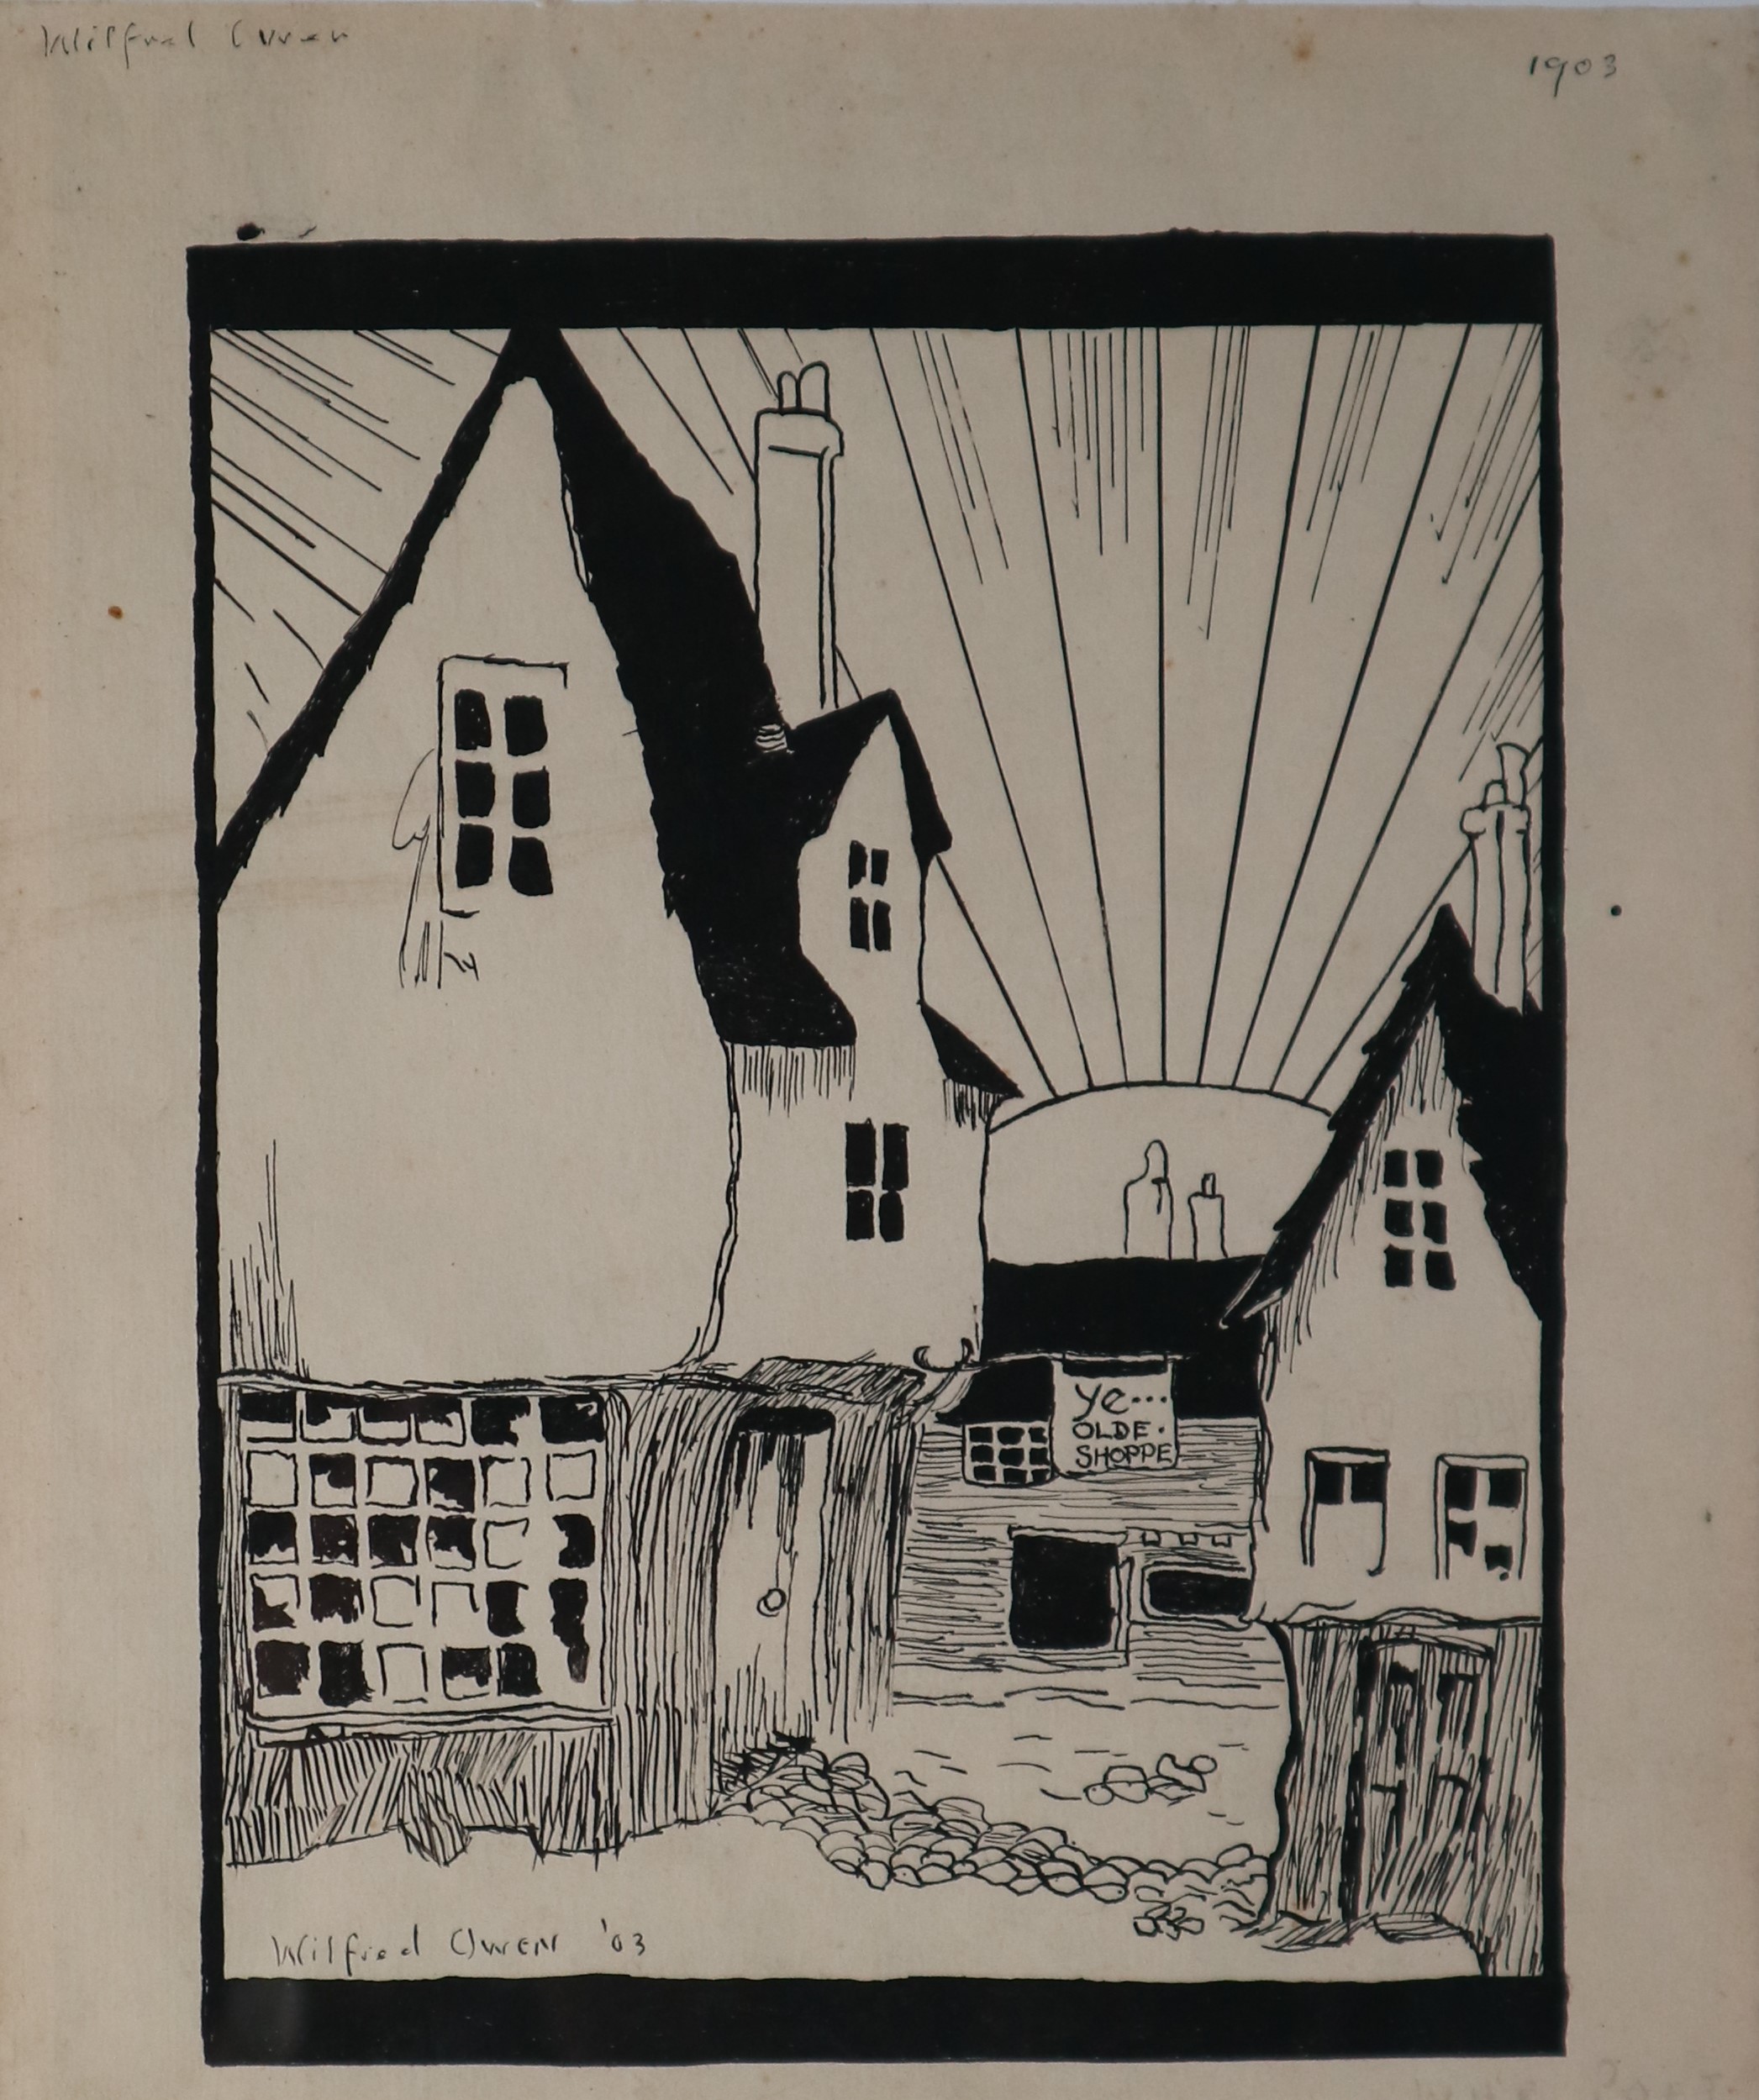 Wilfred Owen (British 1893-1918), pen and ink drawing, 'Ye Olde Shoppe'